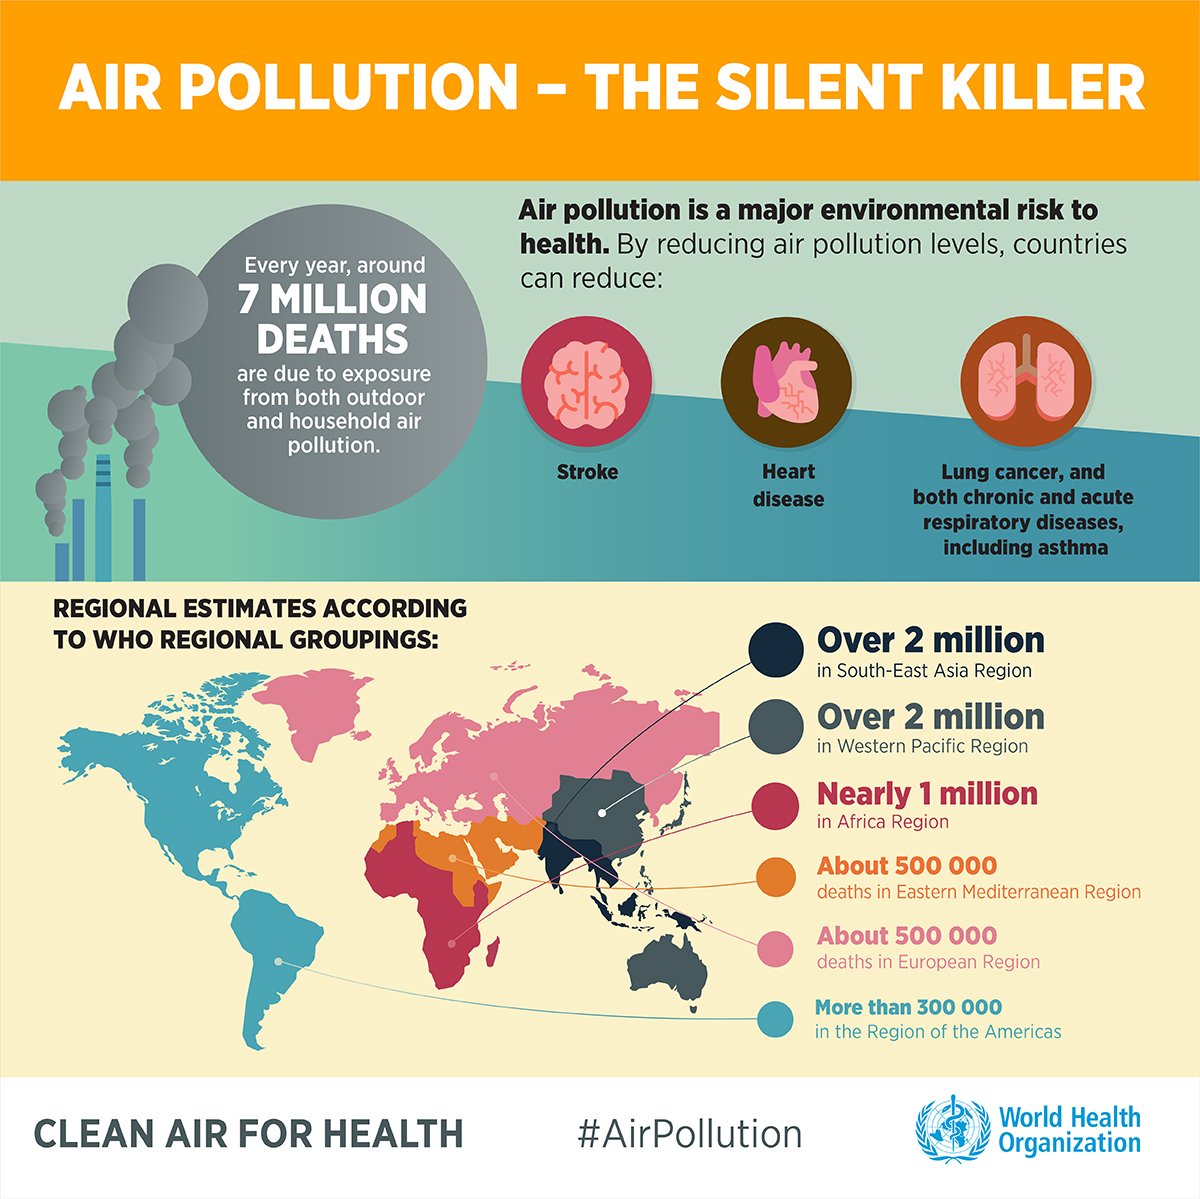 This year the theme for the World Environmental Day is #AirPolluton. It is one of the major environmental risks causing deaths of around 7 million per year. #WorldEnvironmentDay